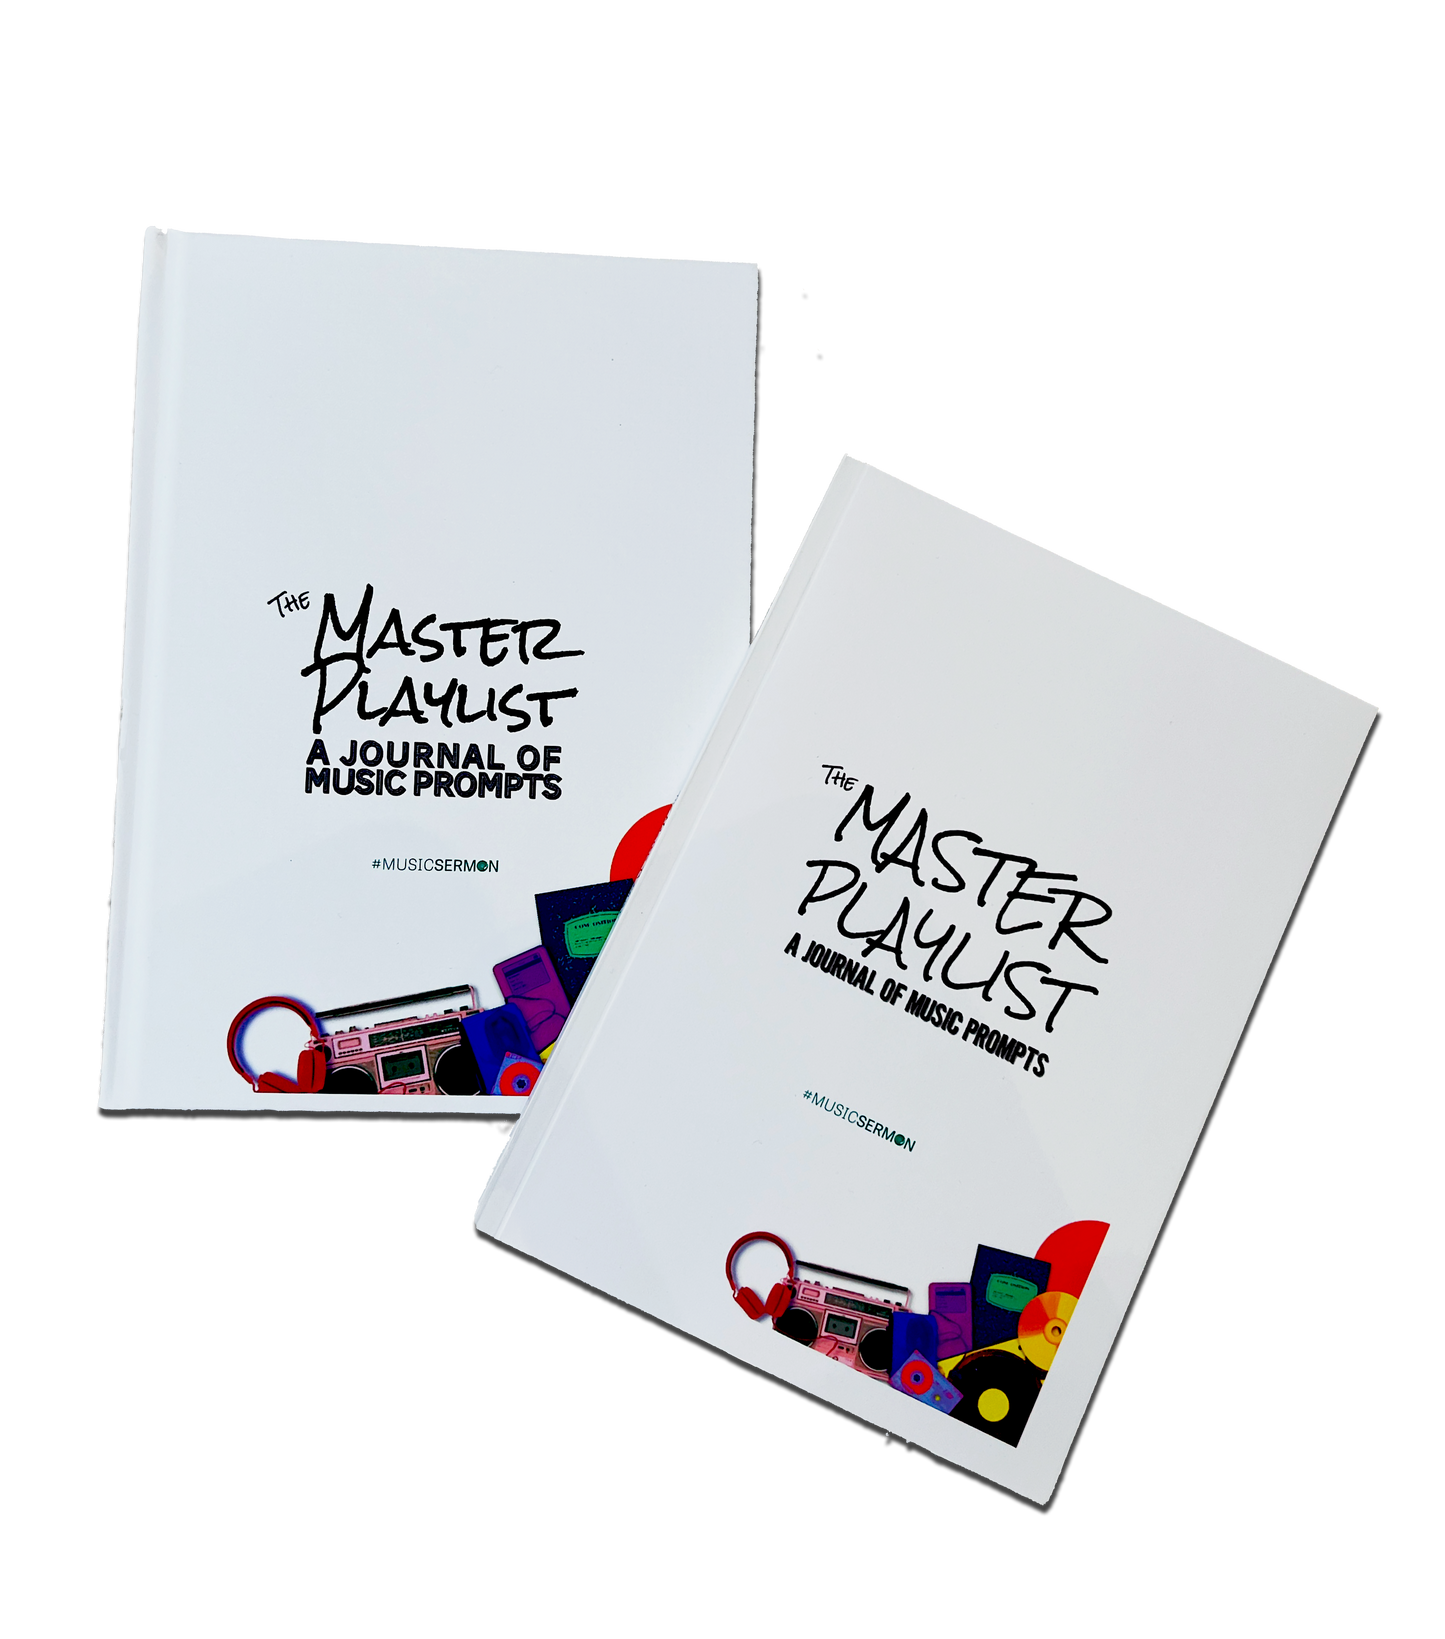 The Master Playlist: A Journal of Music Prompts